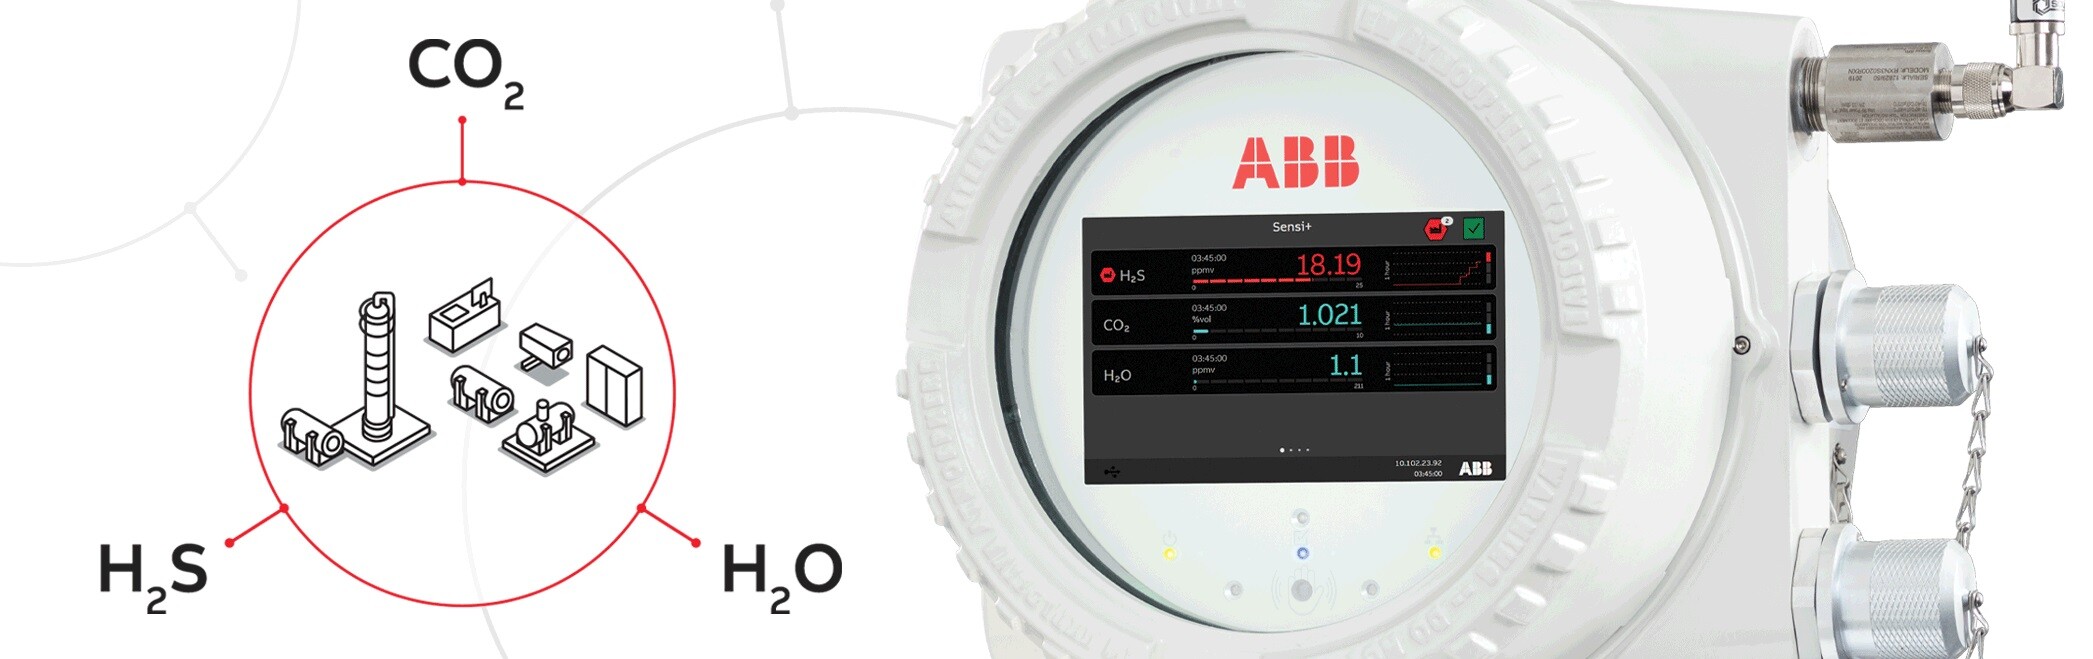 ABB launches Sensi+™ – an analyser for natural gas quality monitoring